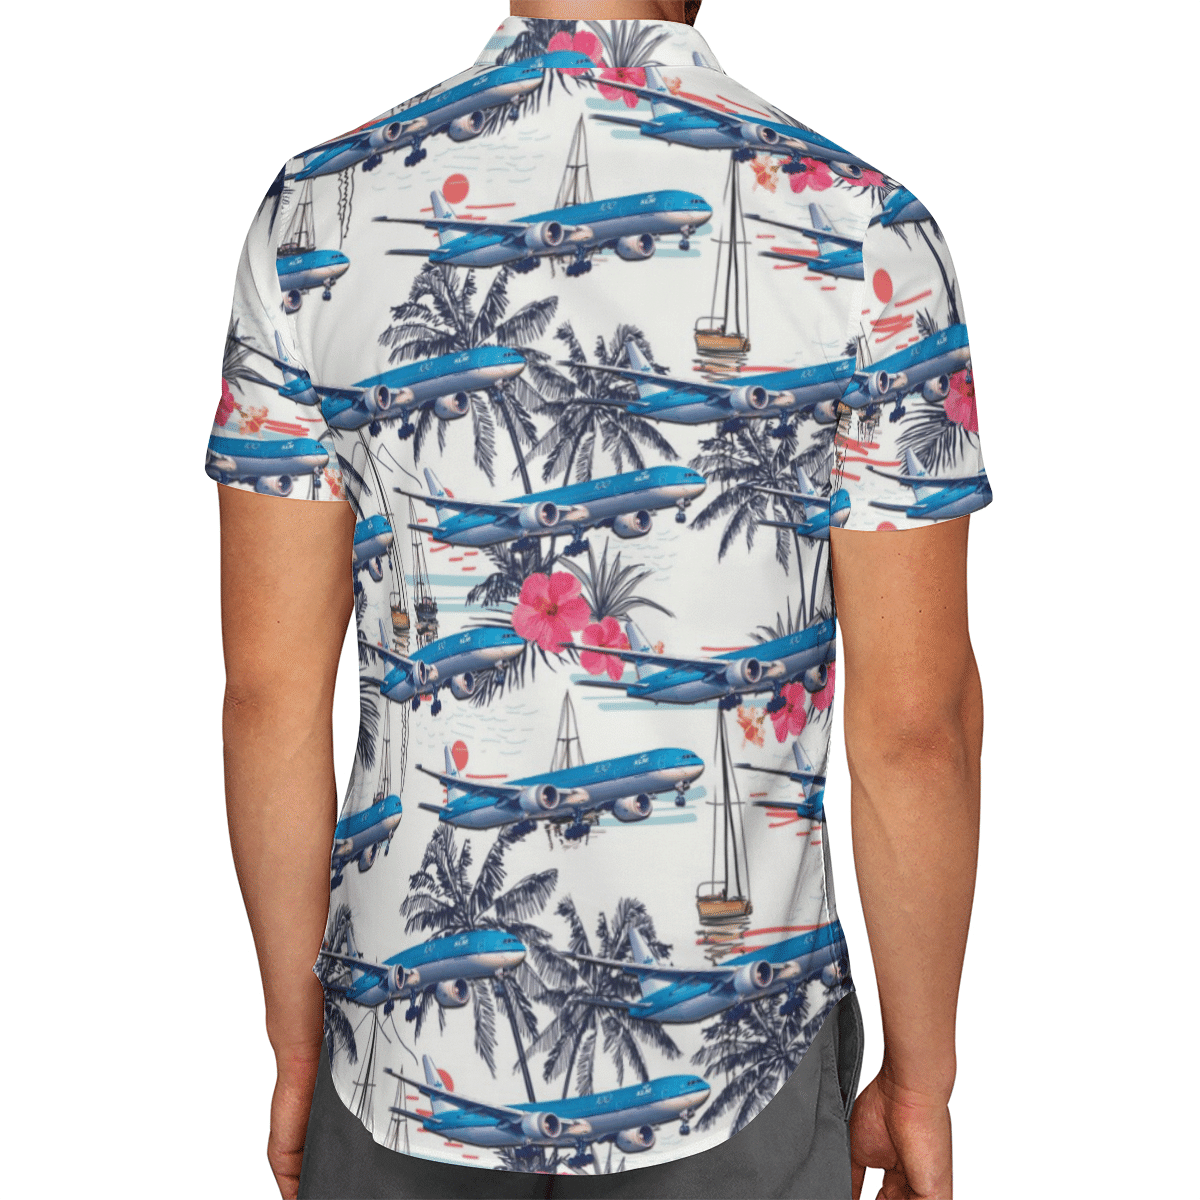 Going to the beach with a quality shirt 124